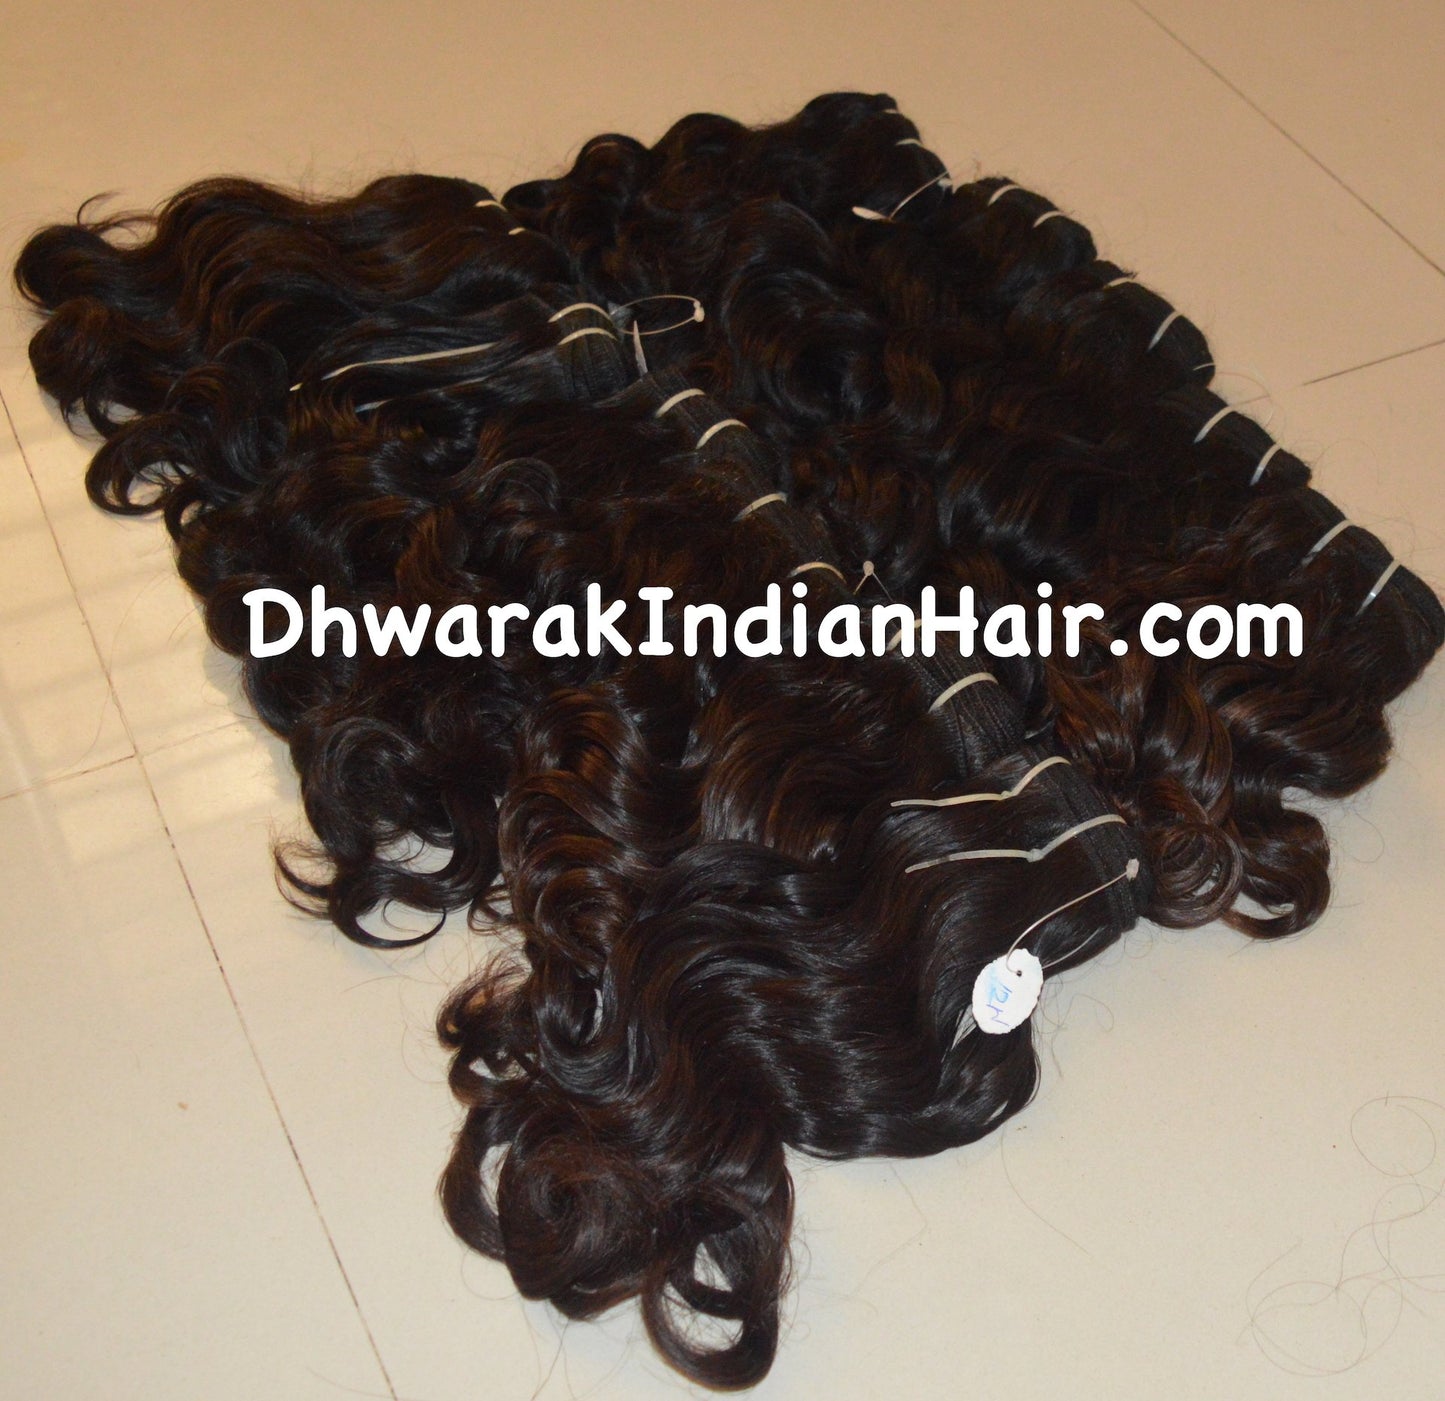 Raw Indian Hair Factory in India Reviews